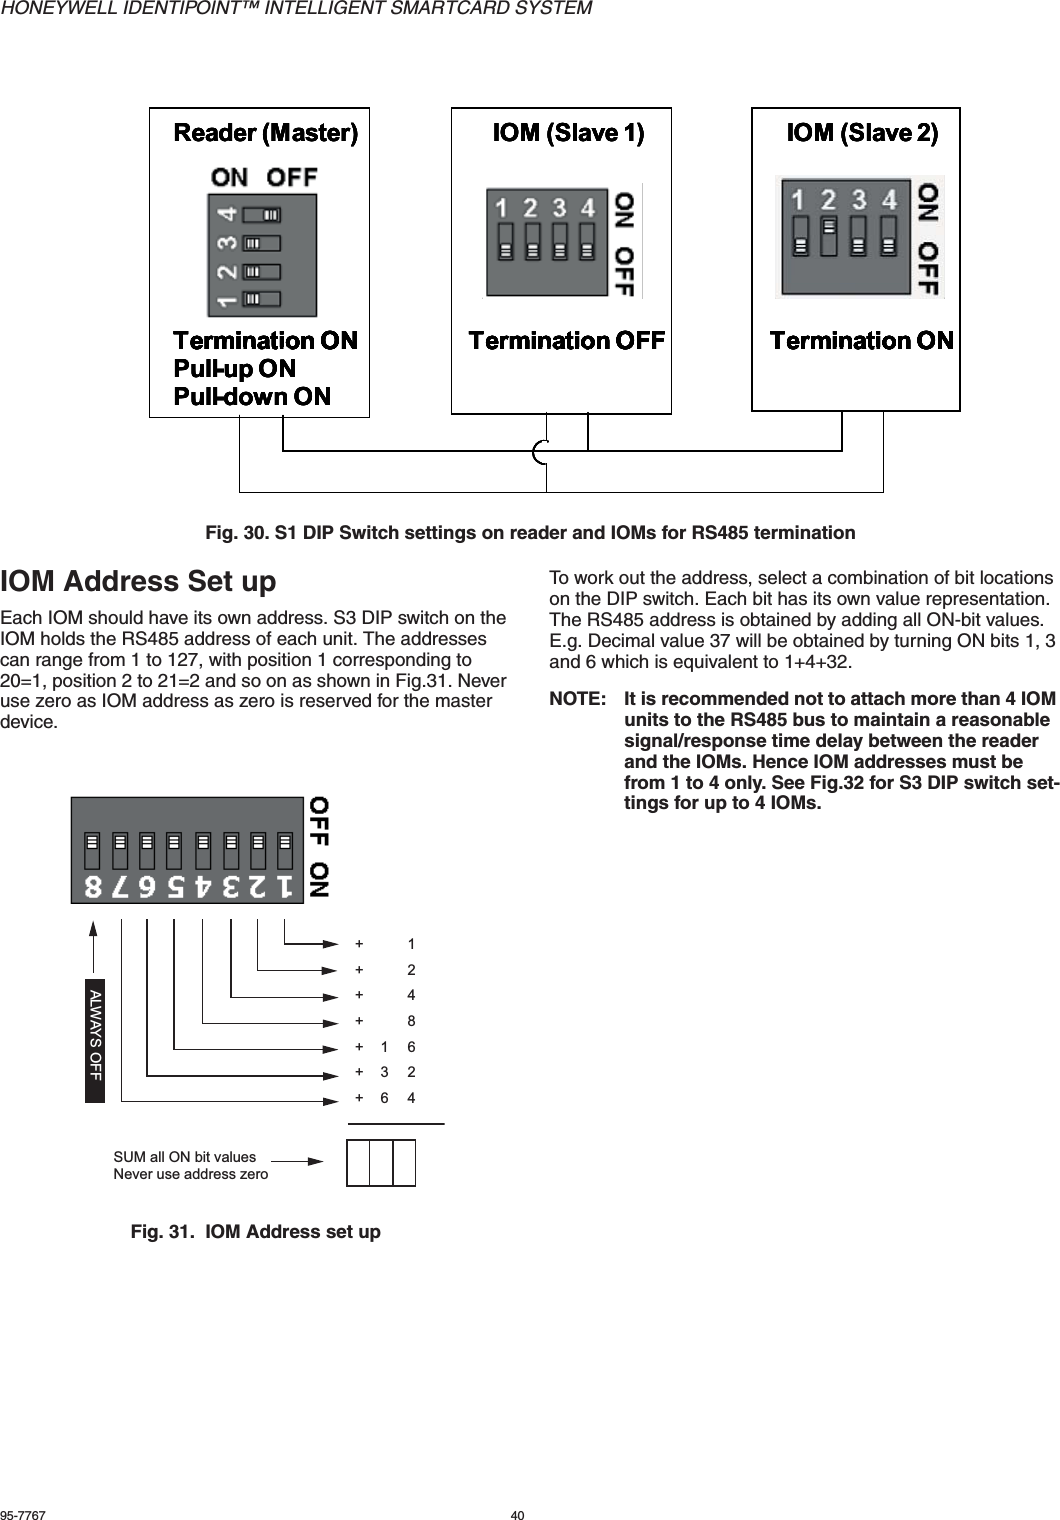 HONEYWELL IDENTIPOINT™ INTELLIGENT SMARTCARD SYSTEM95-7767 40Fig. 30. S1 DIP Switch settings on reader and IOMs for RS485 terminationIOM Address Set upEach IOM should have its own address. S3 DIP switch on the IOM holds the RS485 address of each unit. The addresses can range from 1 to 127, with position 1 corresponding to 20=1, position 2 to 21=2 and so on as shown in Fig.31. Never use zero as IOM address as zero is reserved for the master device.Fig. 31.  IOM Address set upTo work out the address, select a combination of bit locations on the DIP switch. Each bit has its own value representation. The RS485 address is obtained by adding all ON-bit values. E.g. Decimal value 37 will be obtained by turning ON bits 1, 3 and 6 which is equivalent to 1+4+32.NOTE: It is recommended not to attach more than 4 IOM units to the RS485 bus to maintain a reasonable signal/response time delay between the reader and the IOMs. Hence IOM addresses must be from 1 to 4 only. See Fig.32 for S3 DIP switch set-tings for up to 4 IOMs.Termination OFFTermination ON Termination ONIOM (Slave 1)Termination OFFReader (Master)Termination ONPull-up ONPull-down ONIOM (Slave 2)Termination ONTermination OFFTermination ON Termination ONIOM (Slave 1)Termination OFFReader (Master)Termination ONPull-up ONPull-down ONIOM (Slave 2)Termination ONTermination OFFTermination ON Termination ONIOM (Slave 1)Termination OFFReader (Master)Termination ONPull-up ONPull-down ONIOM (Slave 2)Termination ONTermination OFFTermination ON Termination ONIOM (Slave 1)Termination OFFReader (Master)Termination ONPull-up ONPull-down ONIOM (Slave 2)Termination ON+ 1+ 2+ 4+ 8+ 6+ 2+ 4ALWAYS OFF136SUM all ON bit valuesNever use address zero